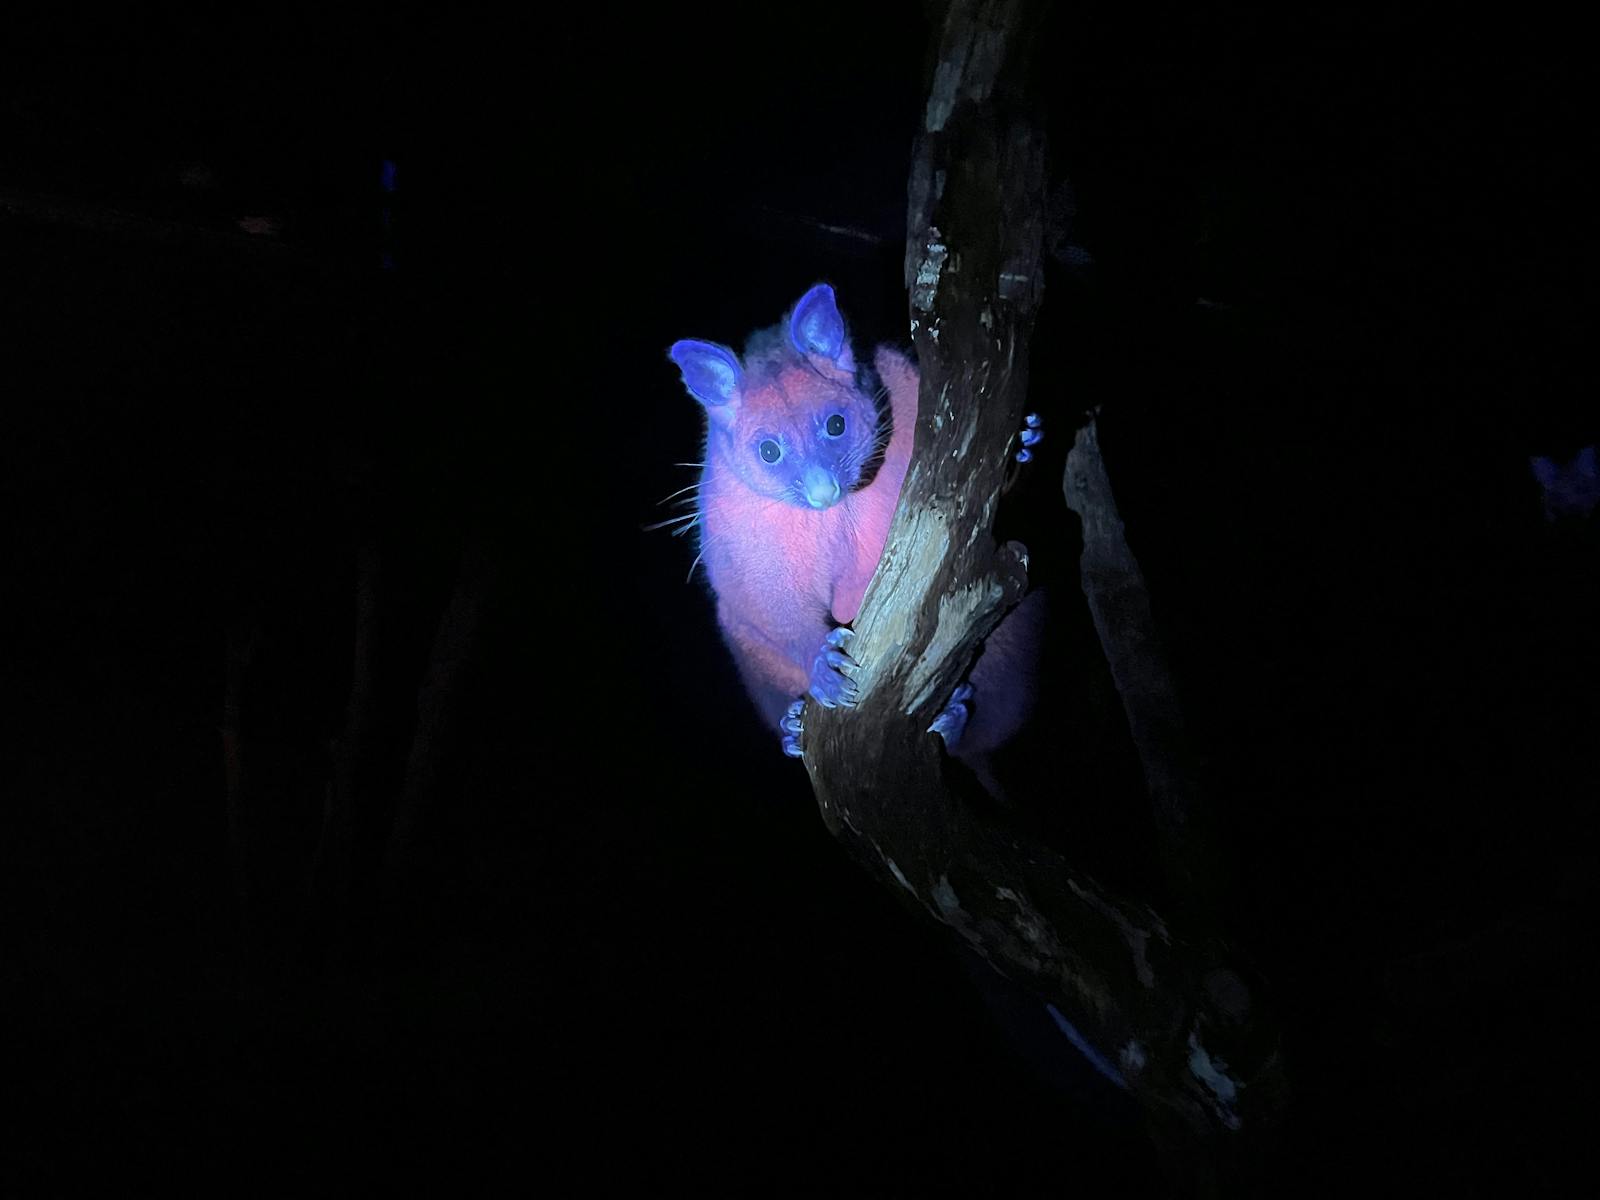 A golden possum at night, under UV light which appears to be glowing pink